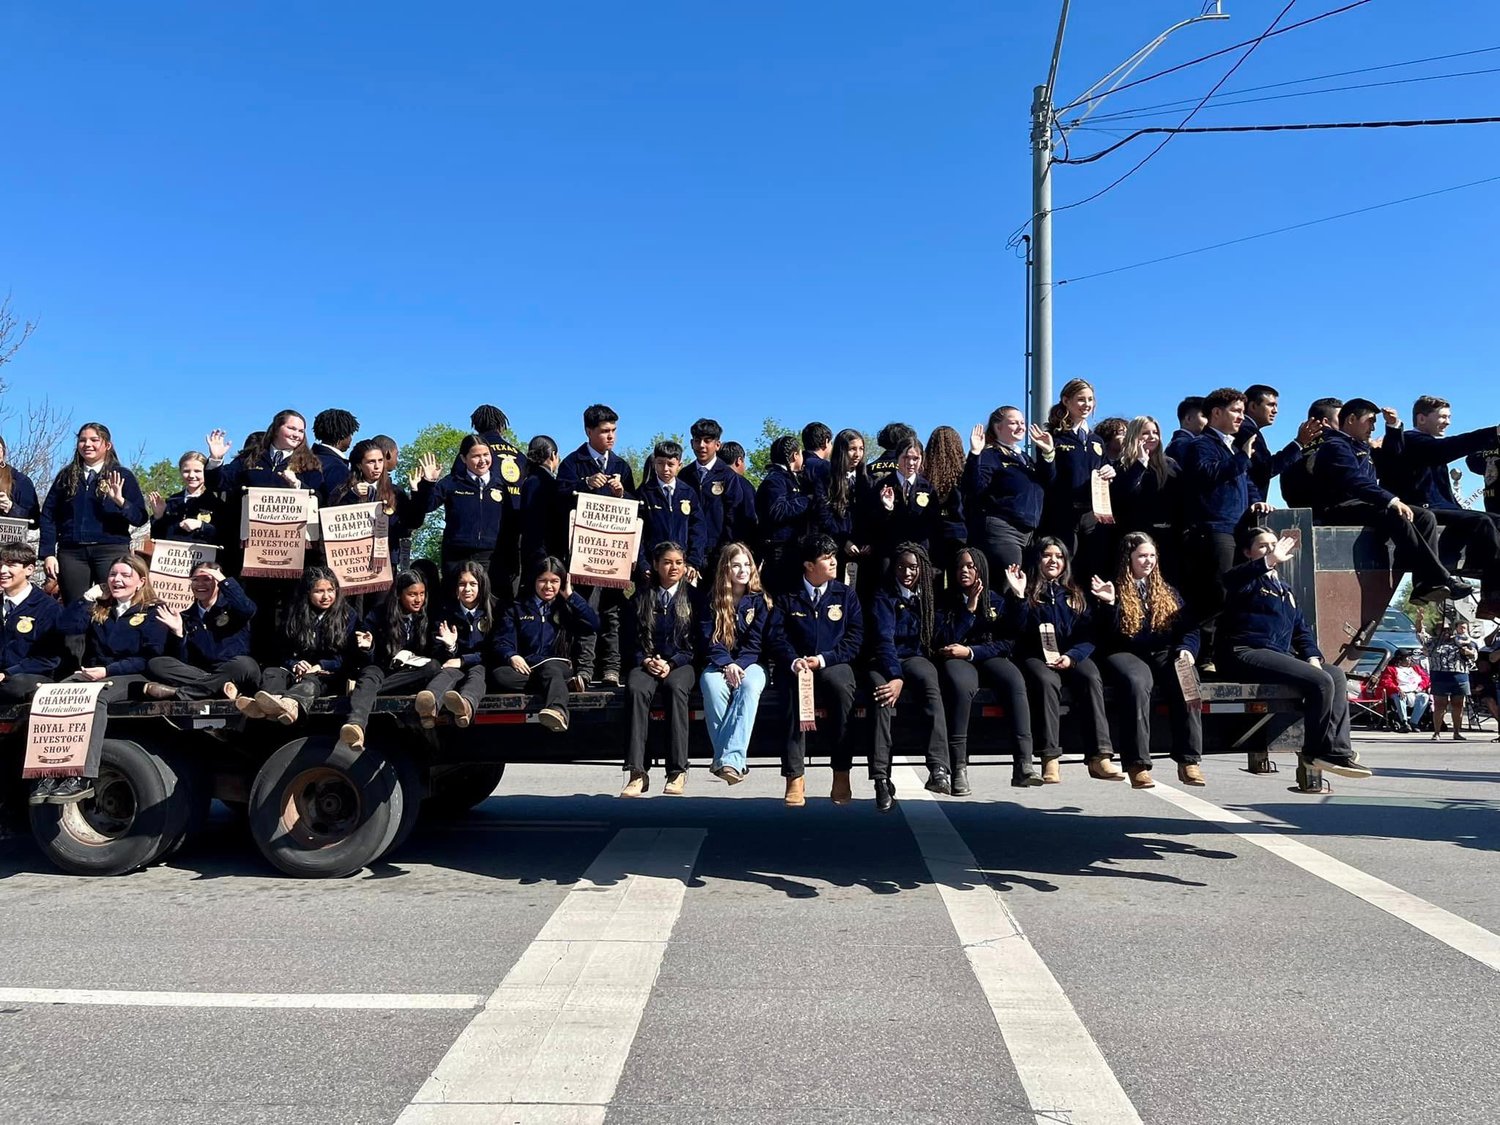 Royal ISD held its annual FFA parade March 25 in Brookshire. Royal FFA students were among many who rode in the parade.